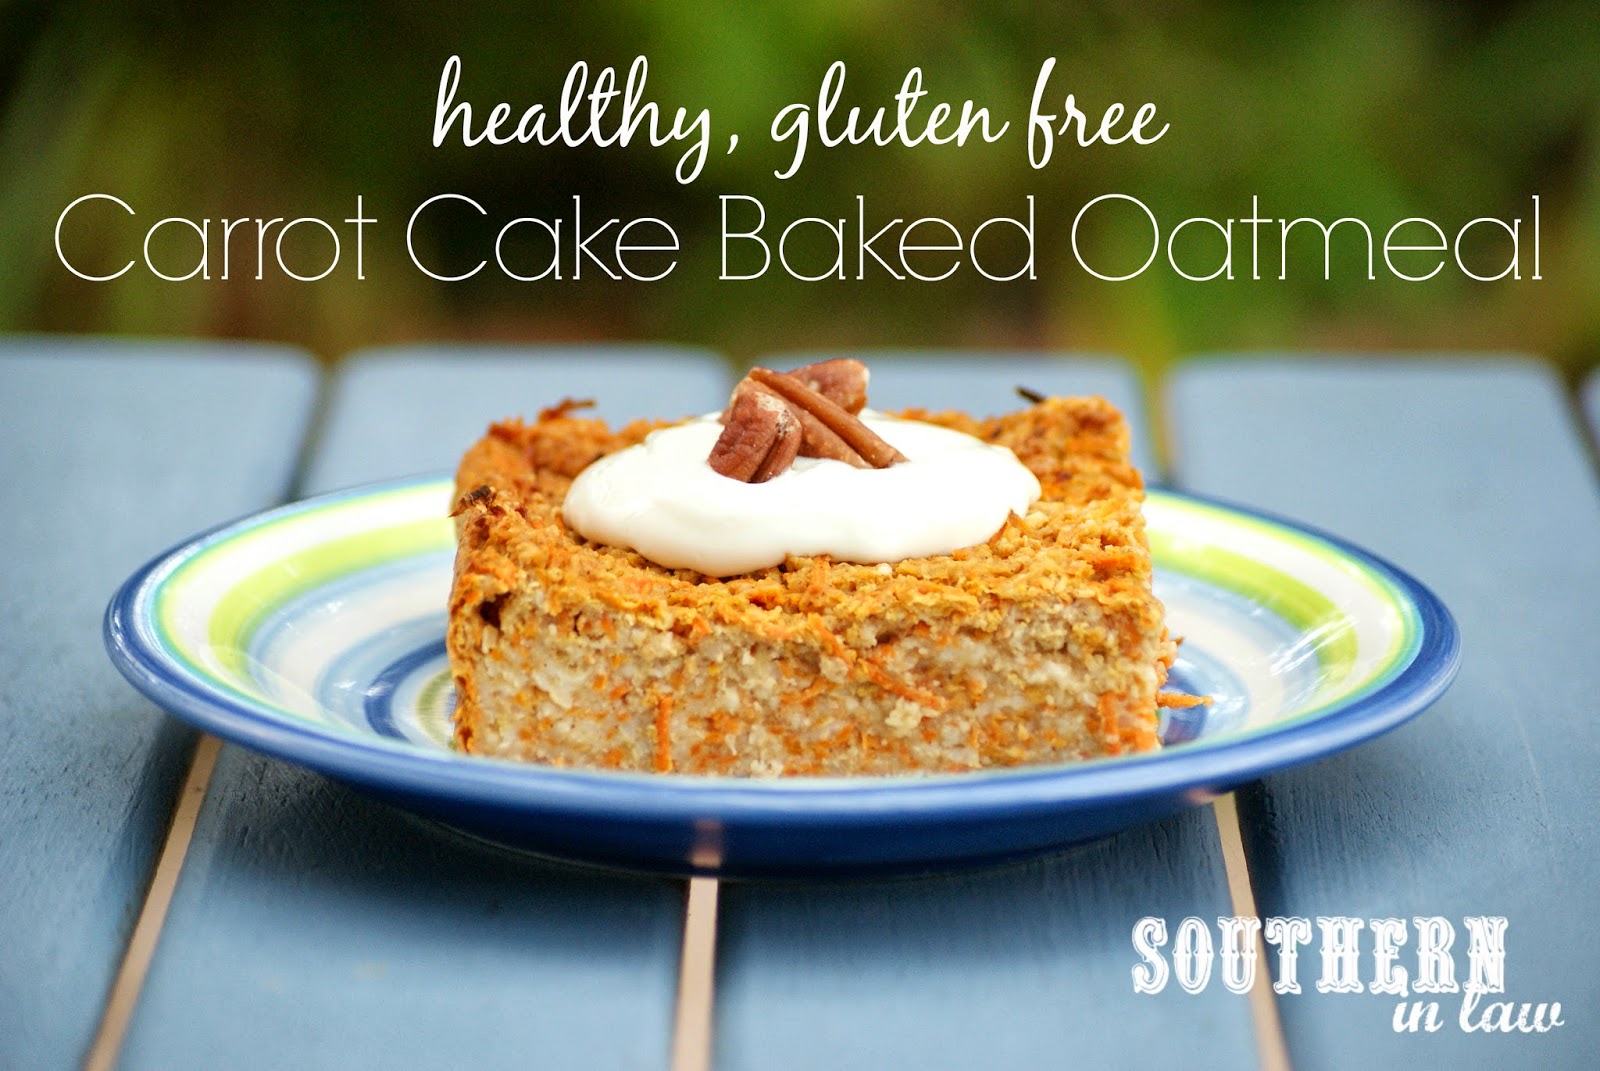 Baked Carrot Cake Oatmeal Recipe - Healthy, gluten free, low fat, sugar free, clean eating friendly